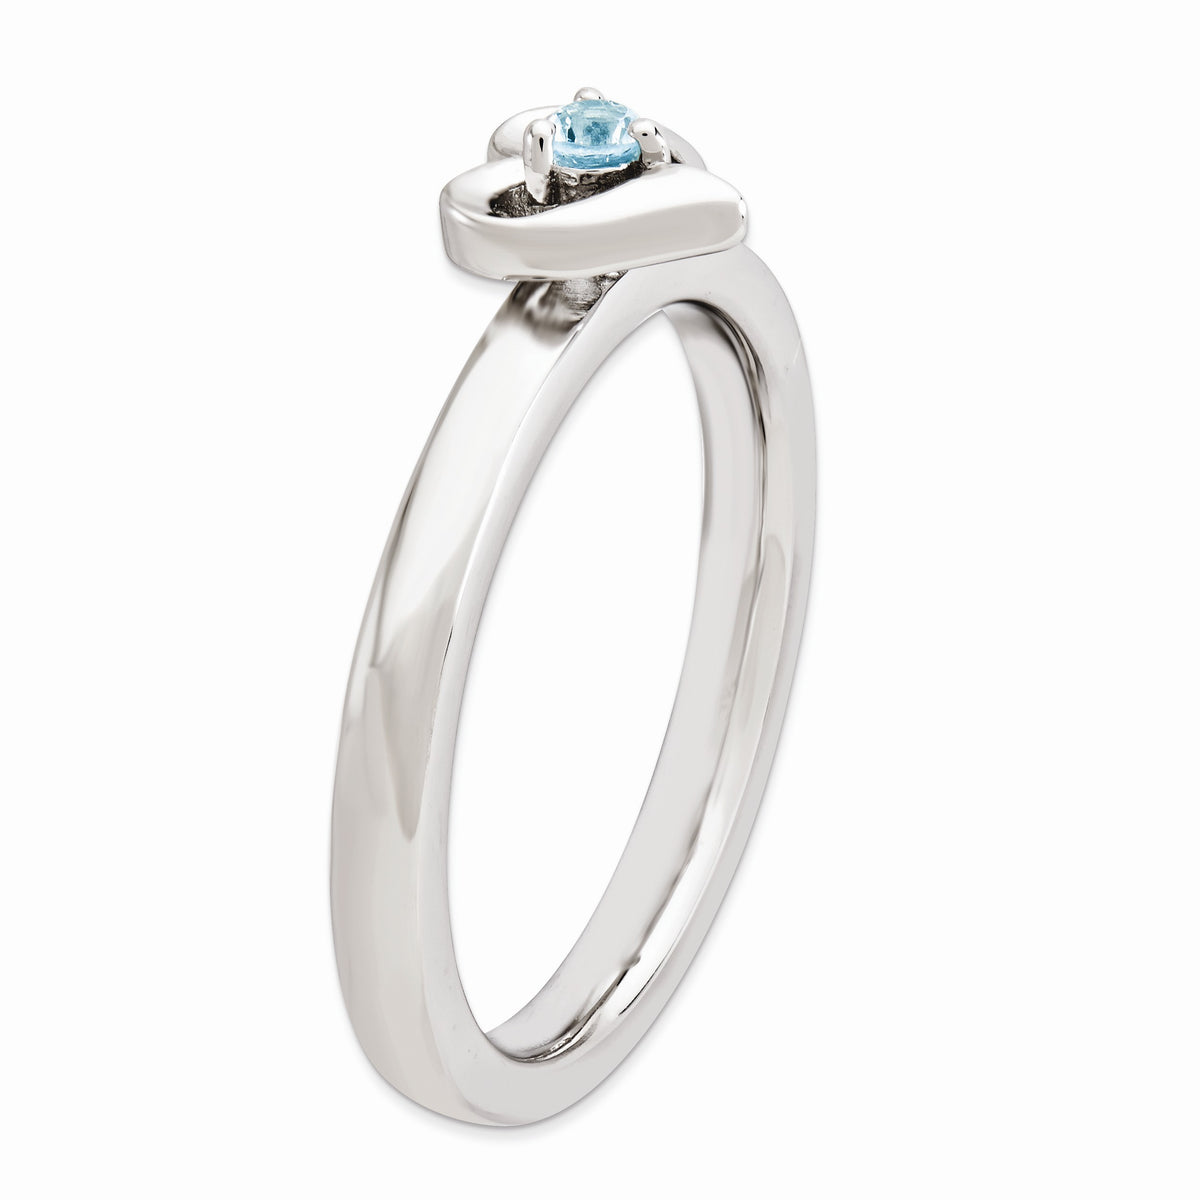 Alternate view of the Sterling Silver Stackable Expressions Blue Topaz 6mm Heart Ring by The Black Bow Jewelry Co.